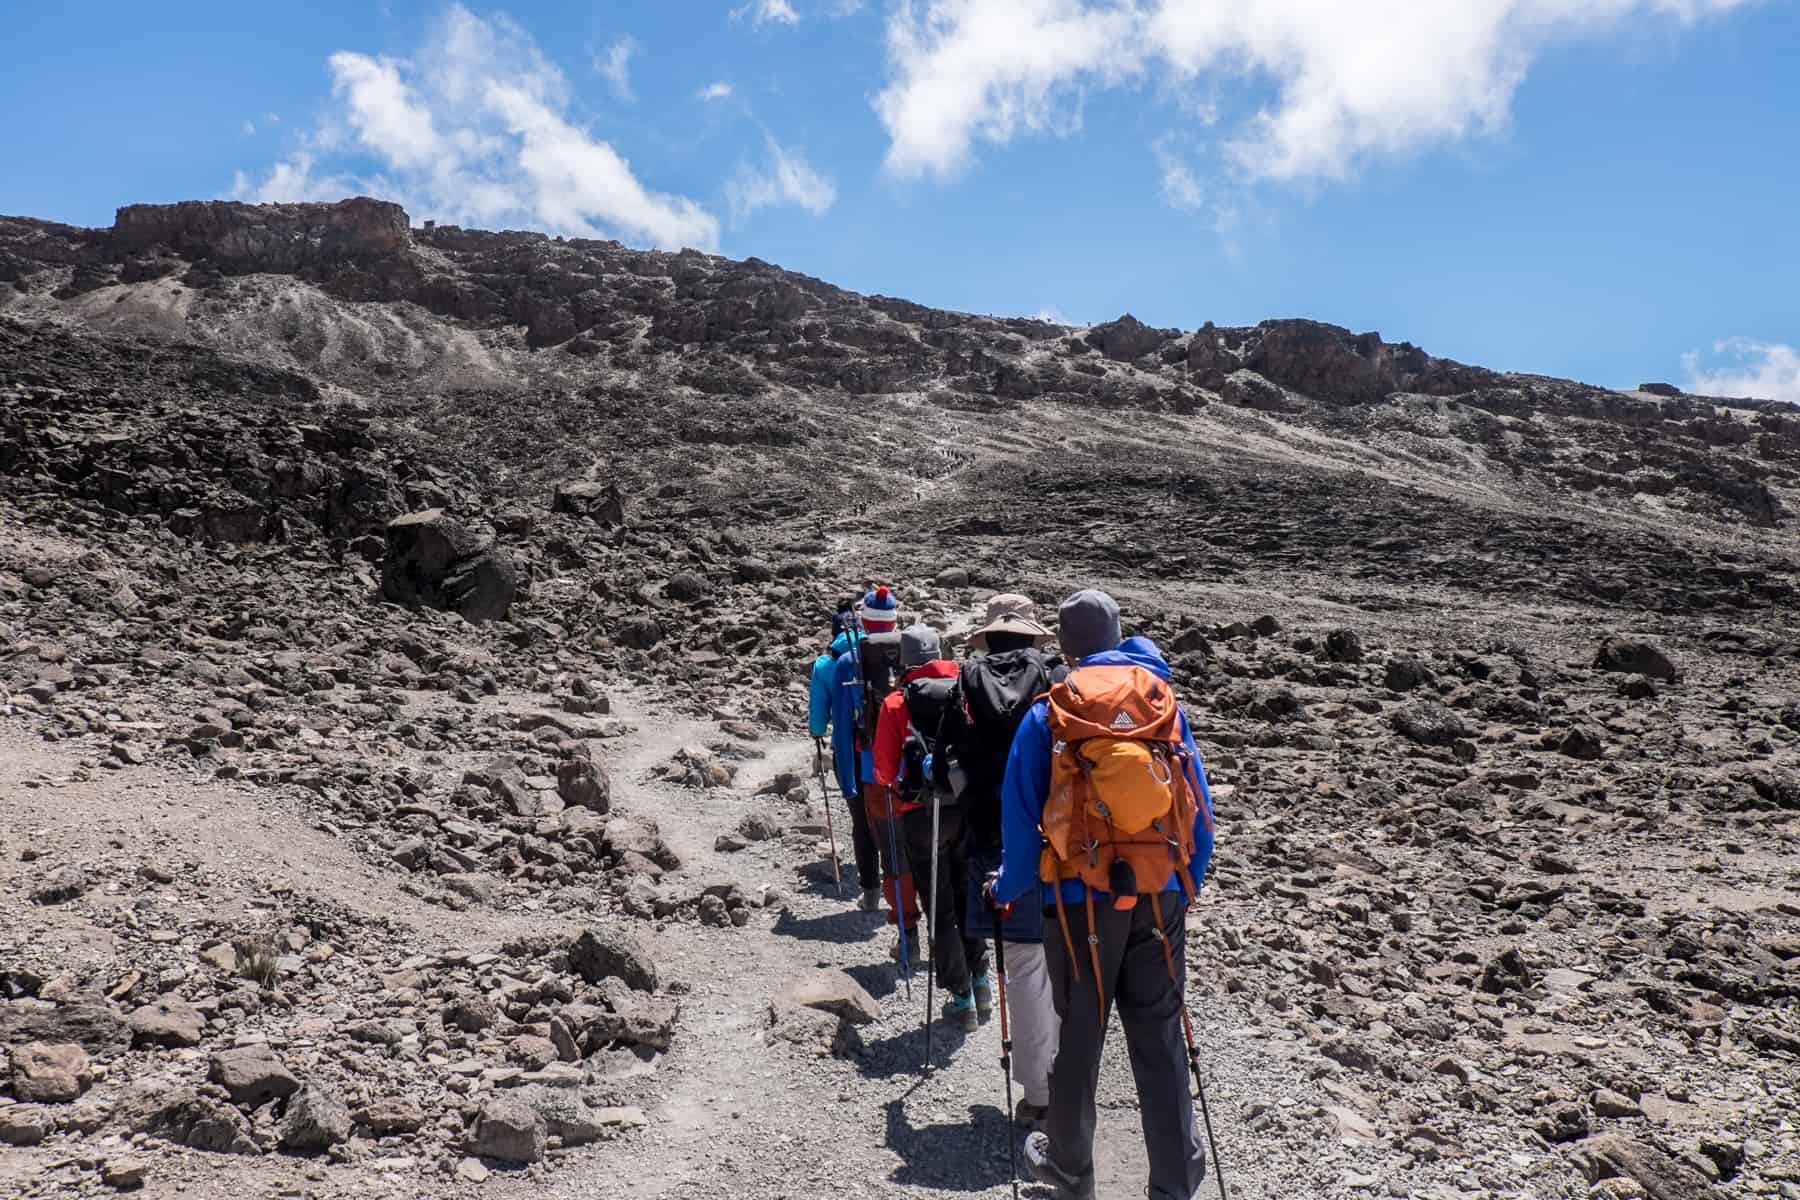 Kilimanjaro trekkers in colourful clothing walking on a flattened pathway on a steep, rocky slope. 